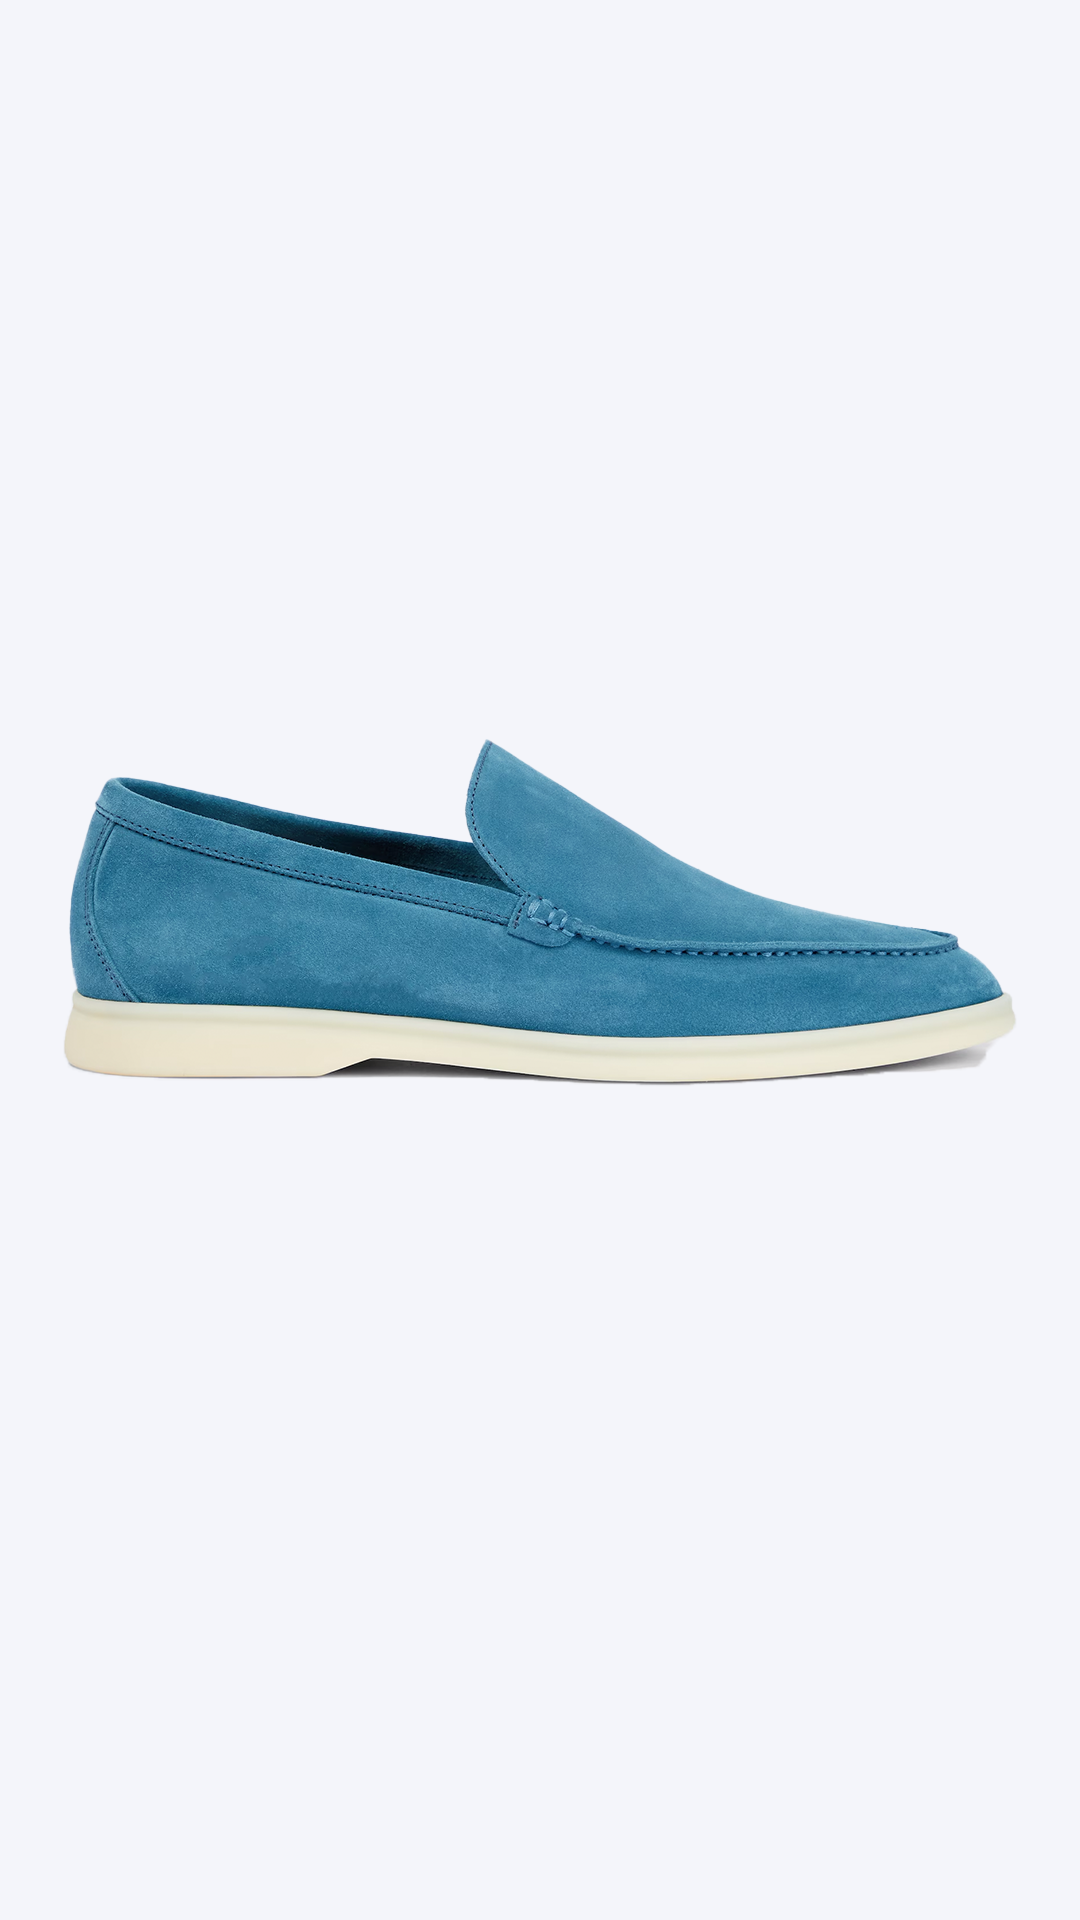 Monaco - Baby Blue Loafers